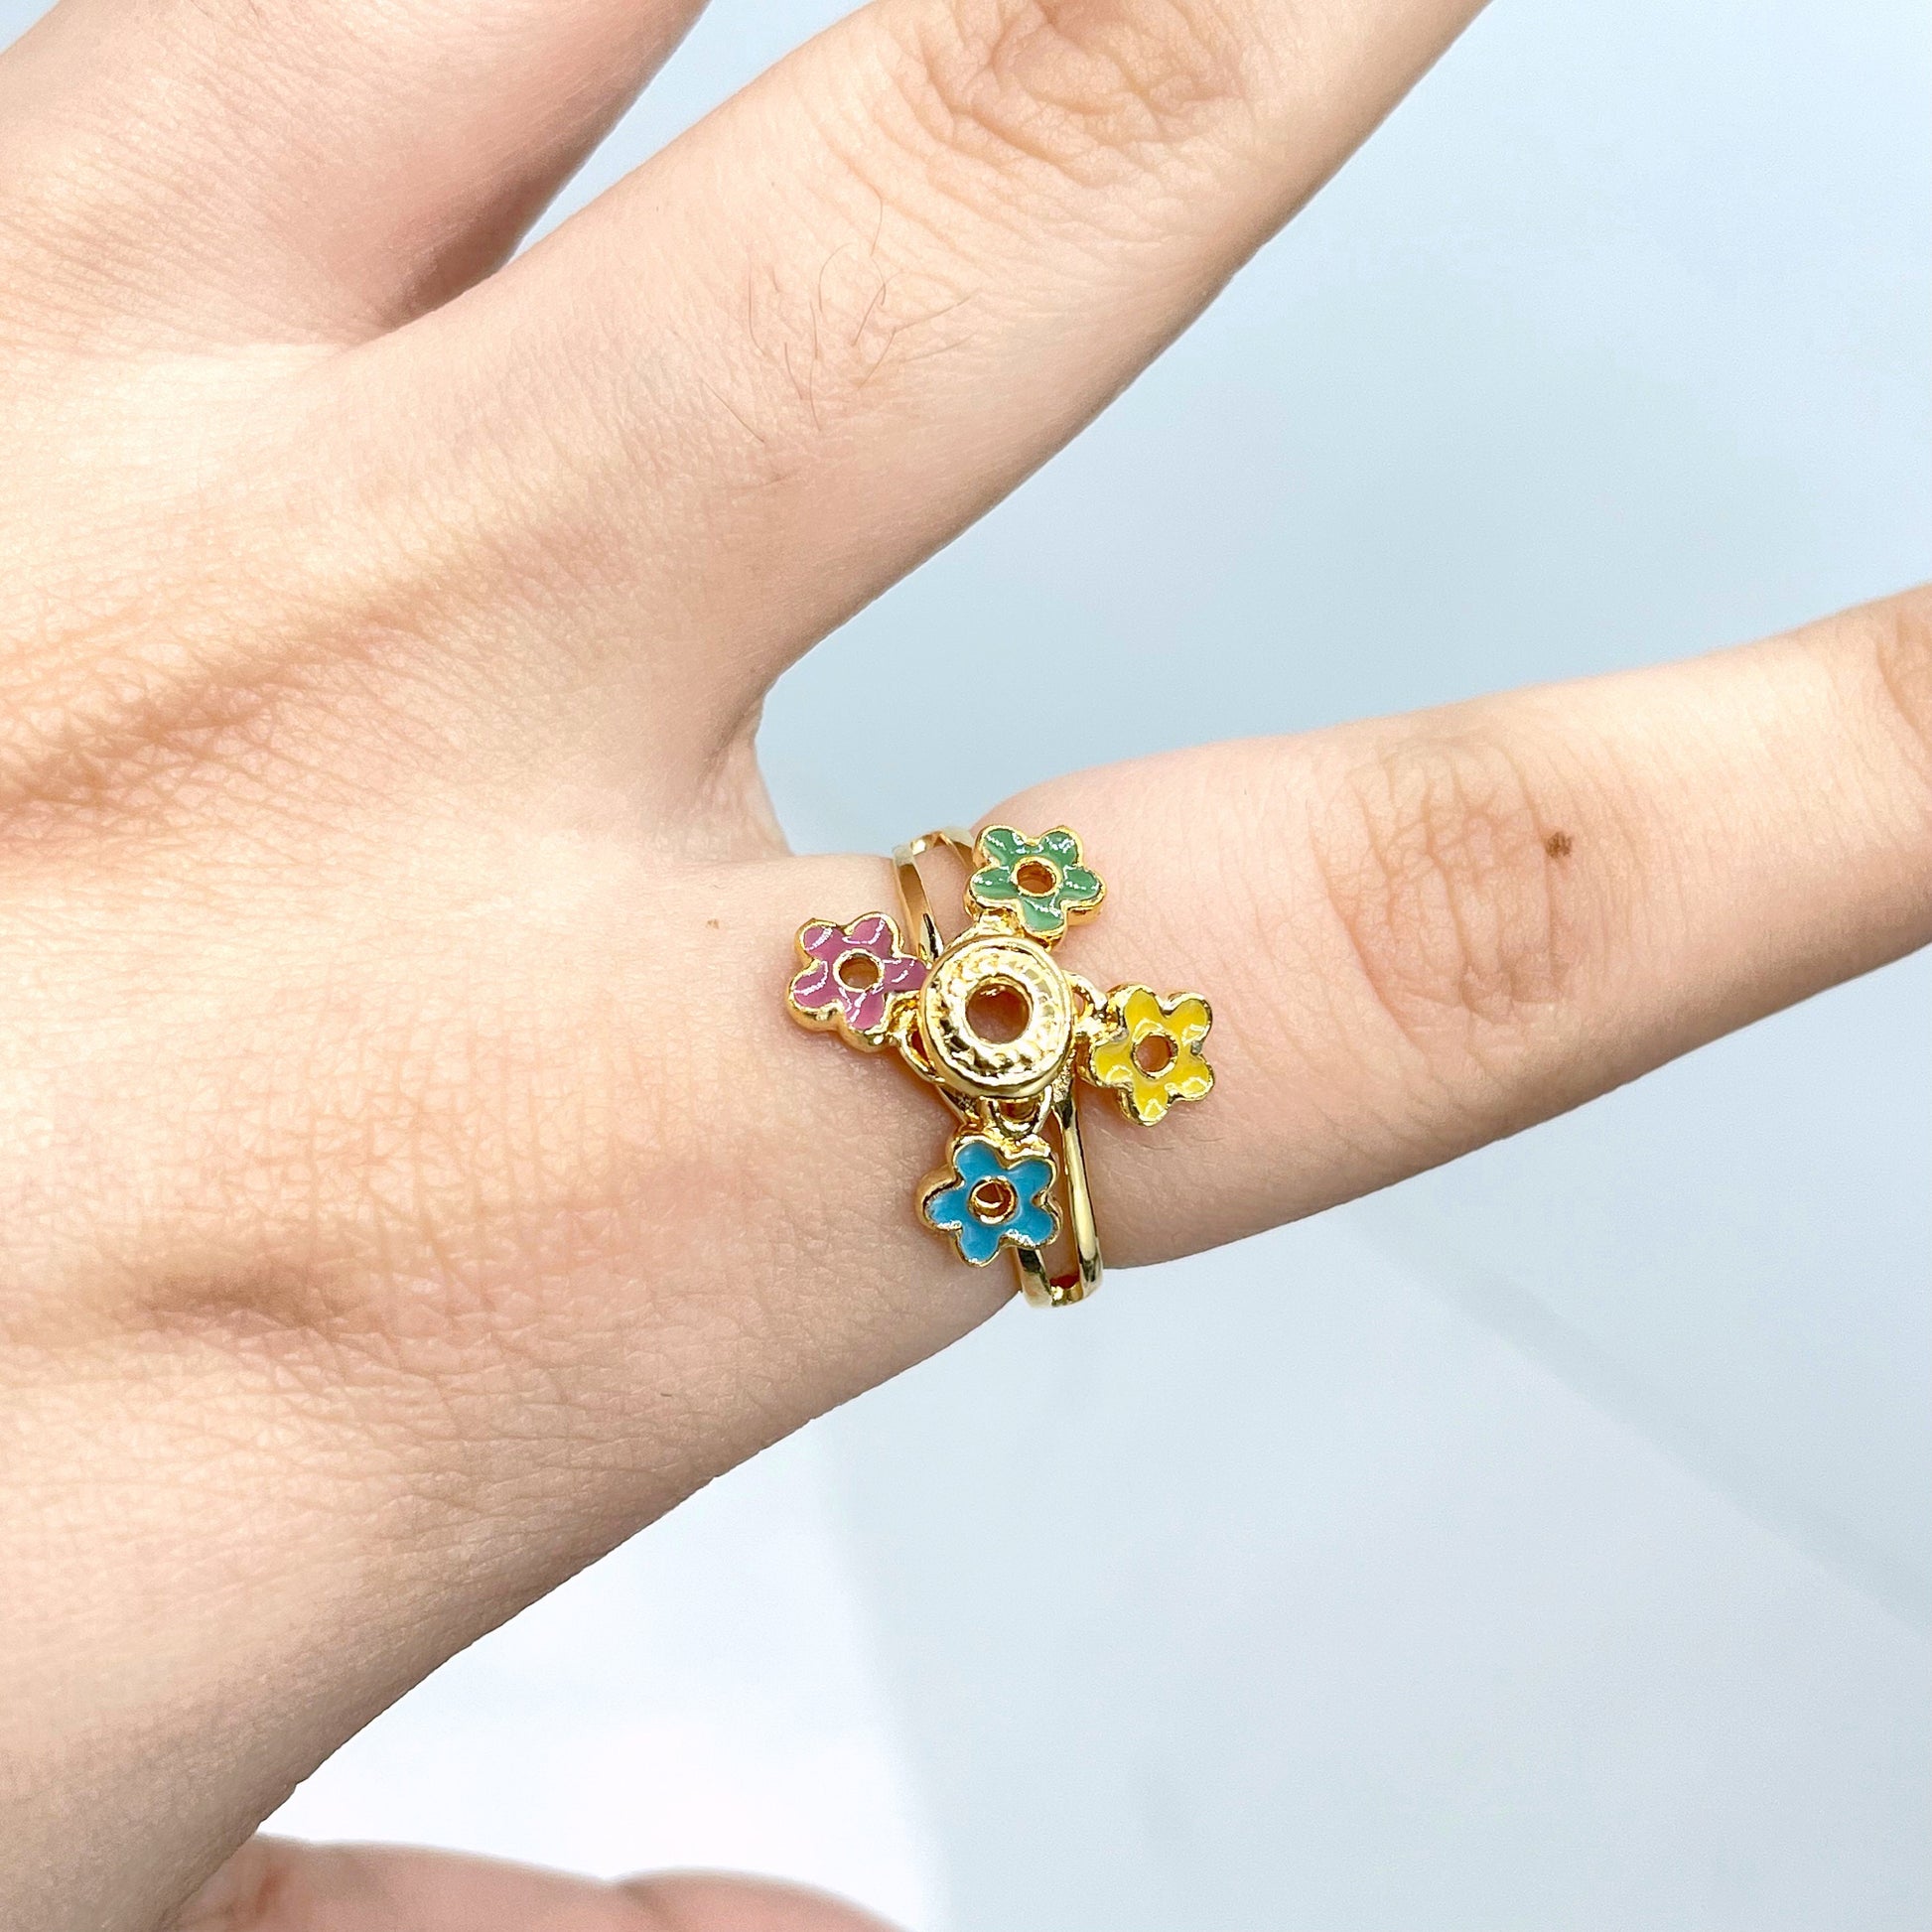 18k Gold Filled Colored Enamel Yellow, Blue, Green and Pink Flowers and Circle Ring, Wholesale Jewelry Making Supplies